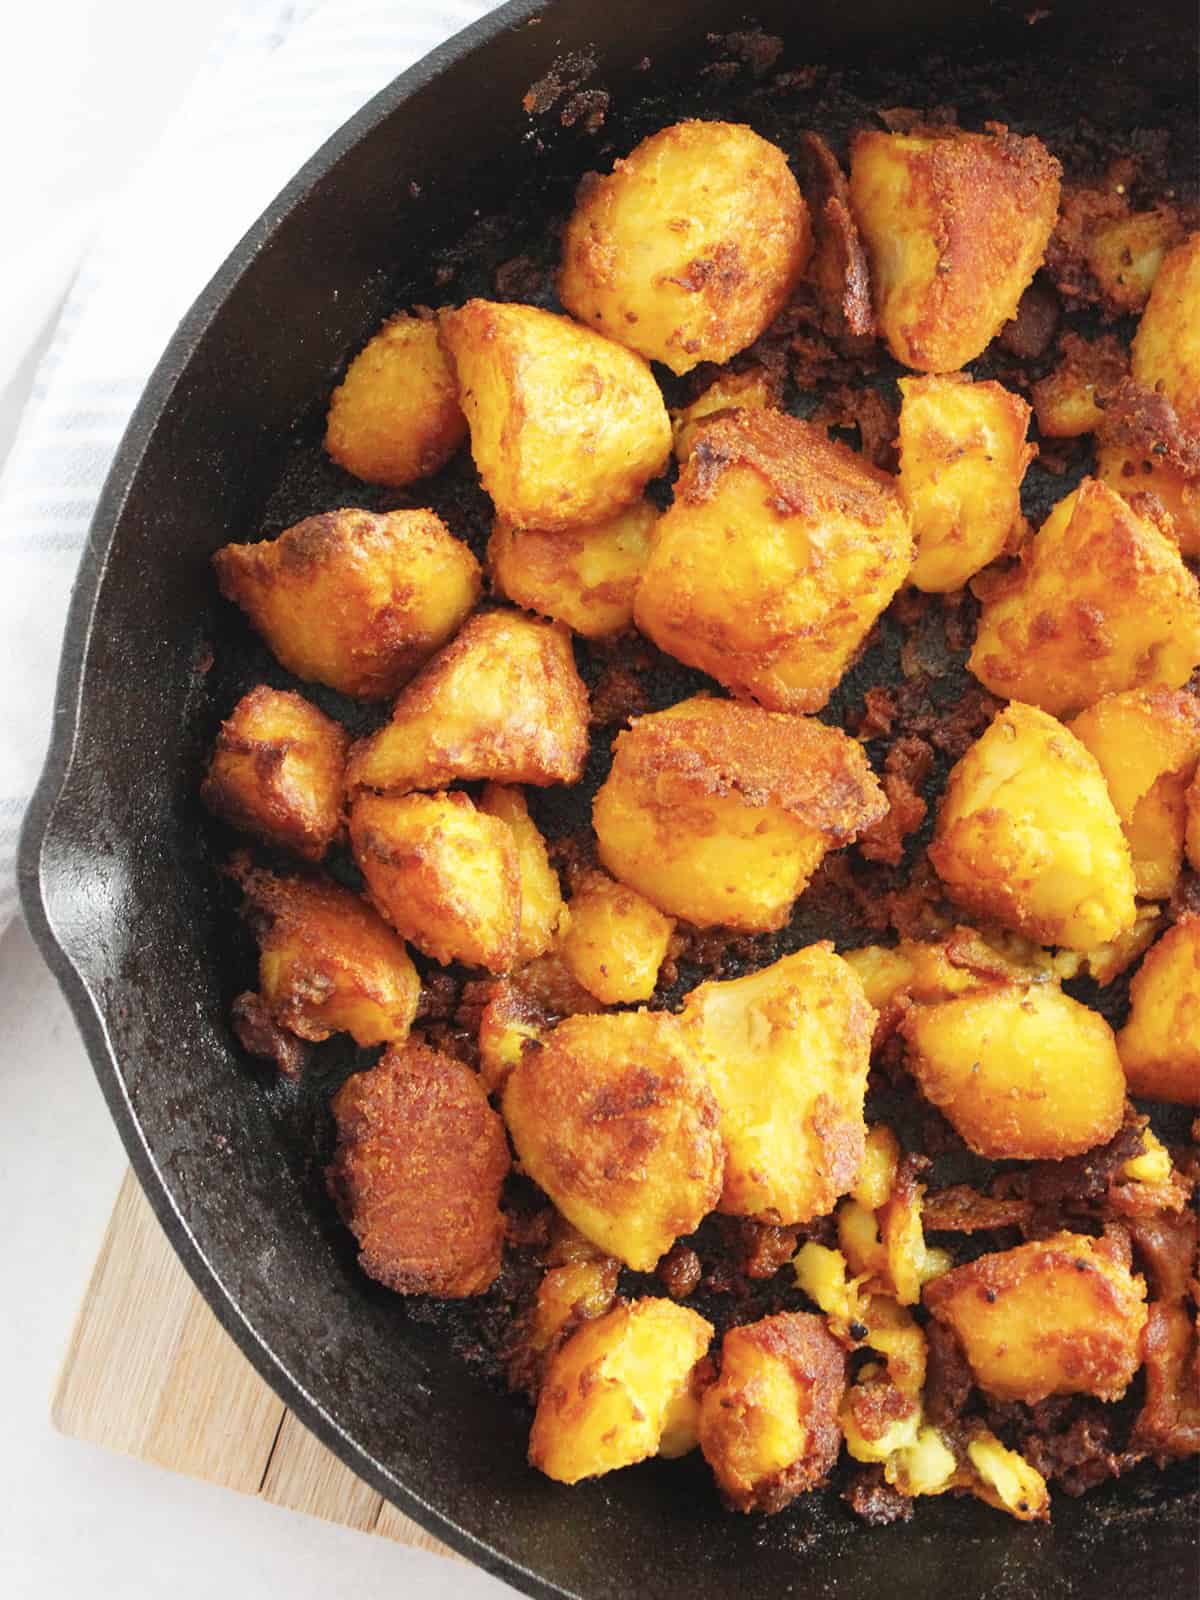 Roasted turmeric potatoes in a cast iron skillet ready to serve.